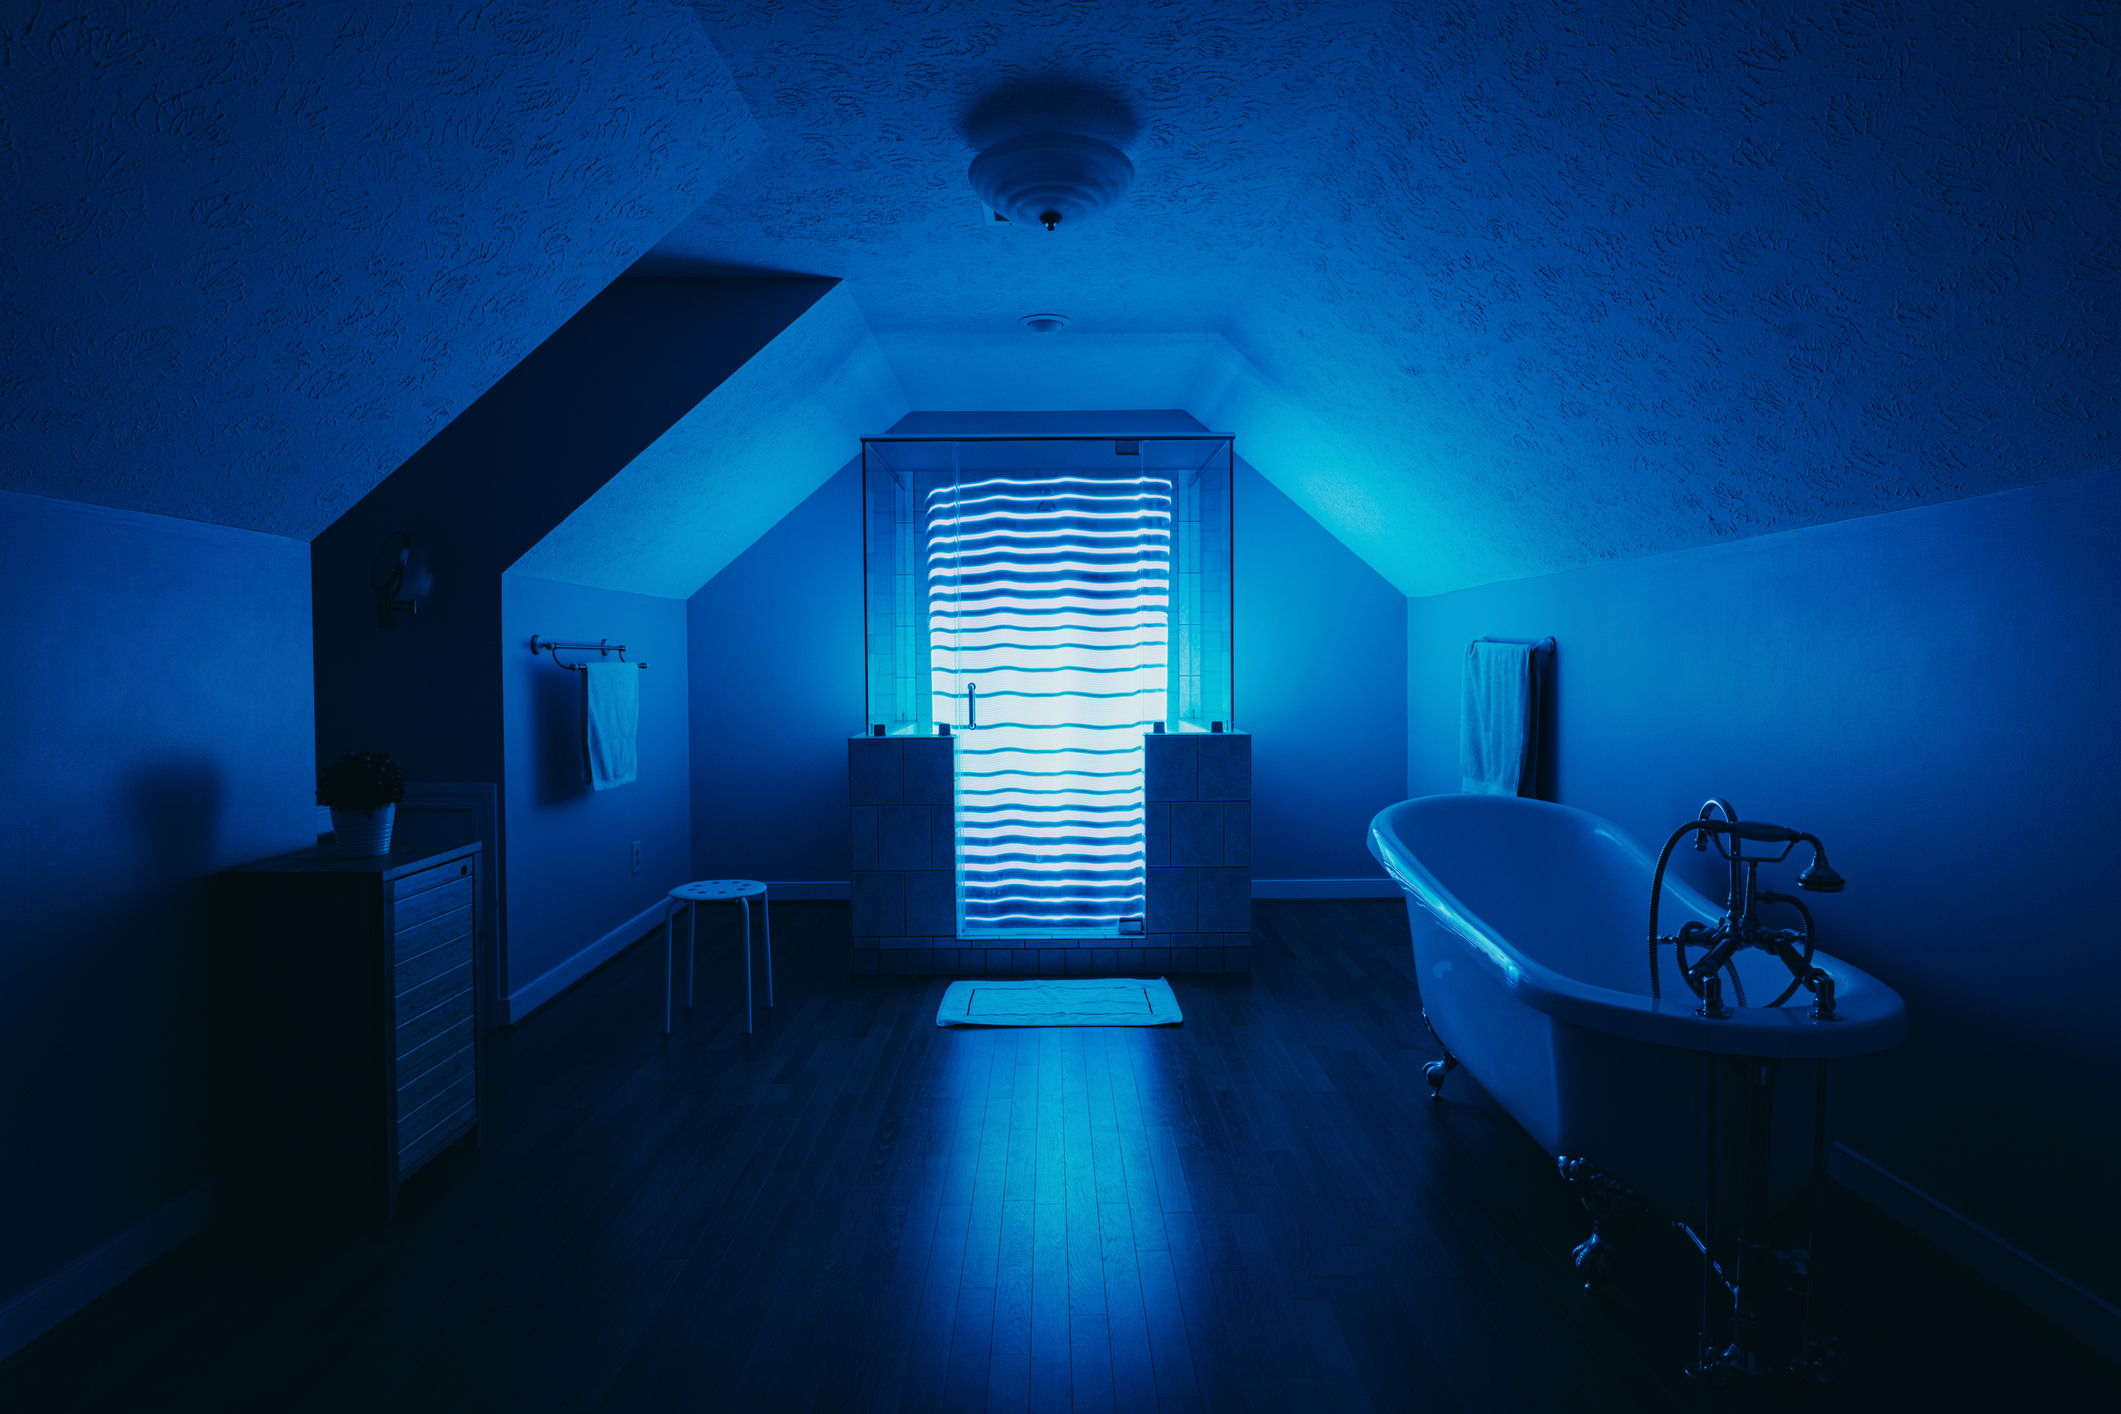 A dimly lit attic bathroom with a freestanding tub and an illuminated patterned window